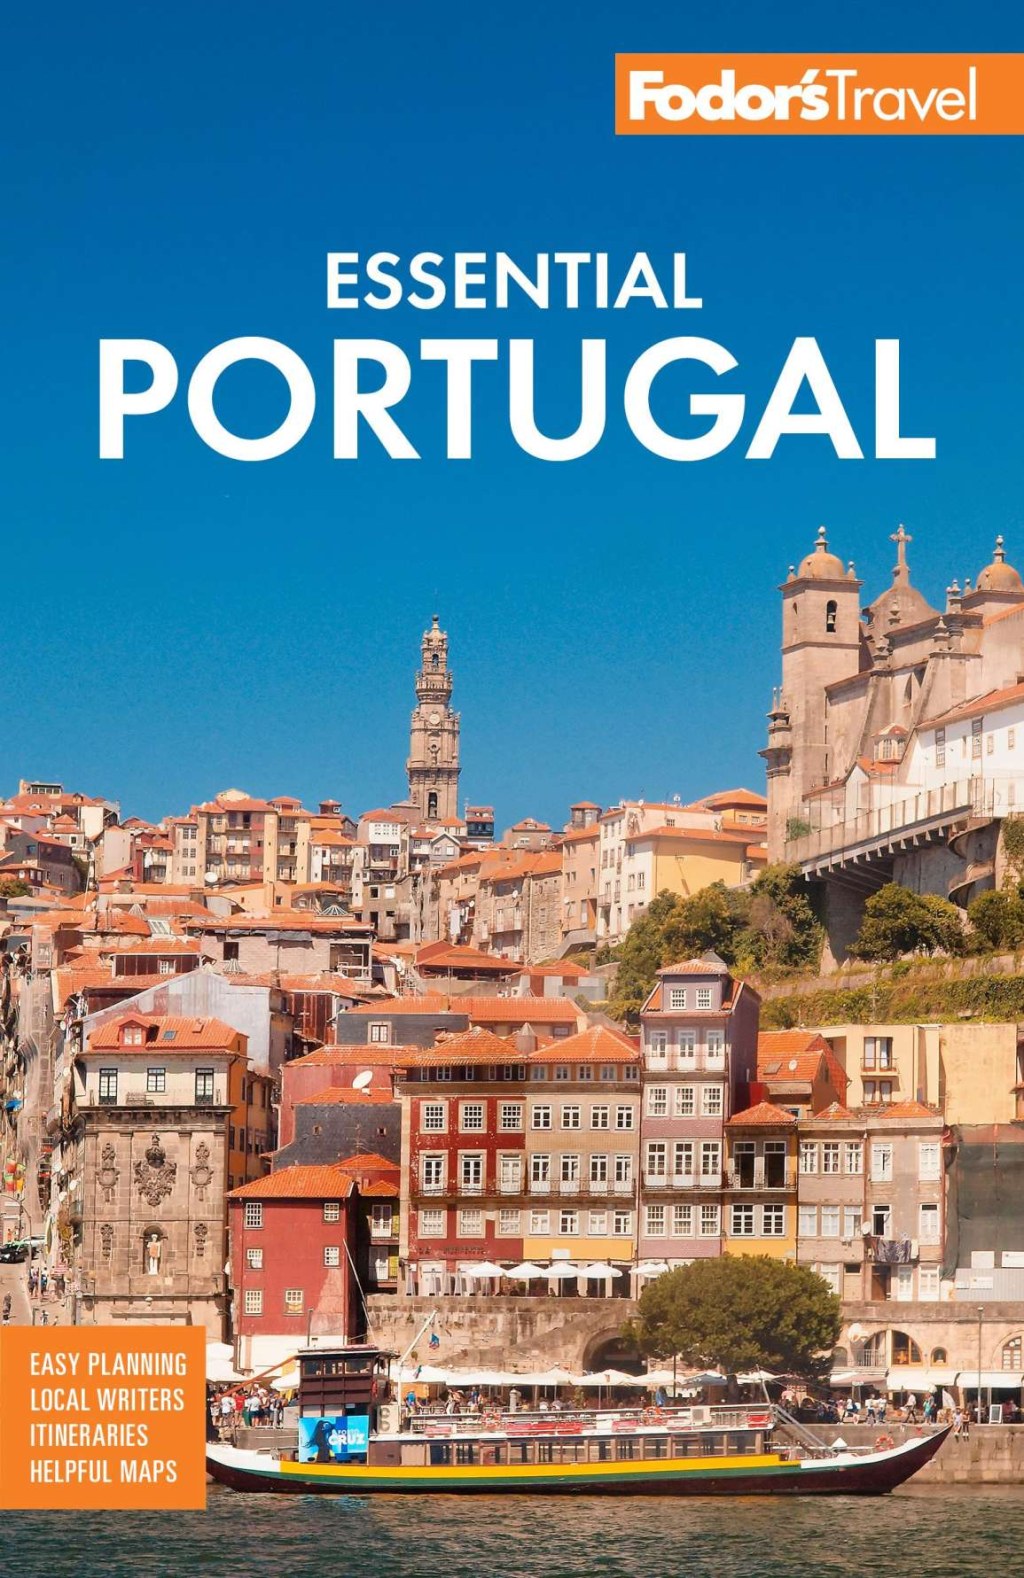 Picture of: Fodor’s Travel Guides: Fodor’s Essential Portugal